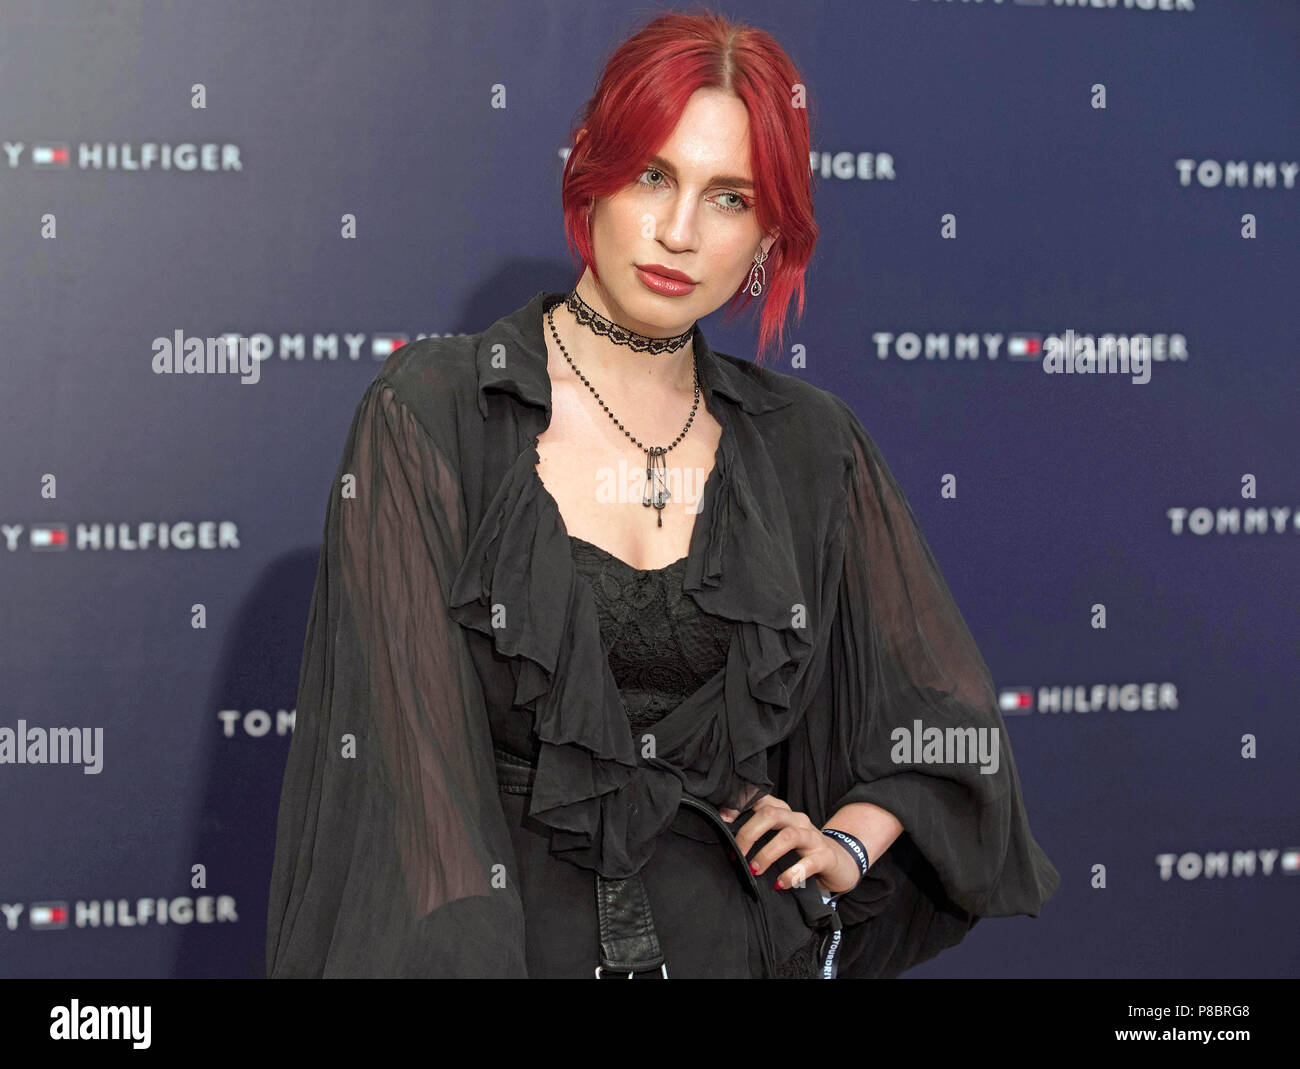 Nikita Andrianova arrives for 'An audience with Lewis Hamilton' at the  Tommy Hilfiger store on Regent Street, London Stock Photo - Alamy